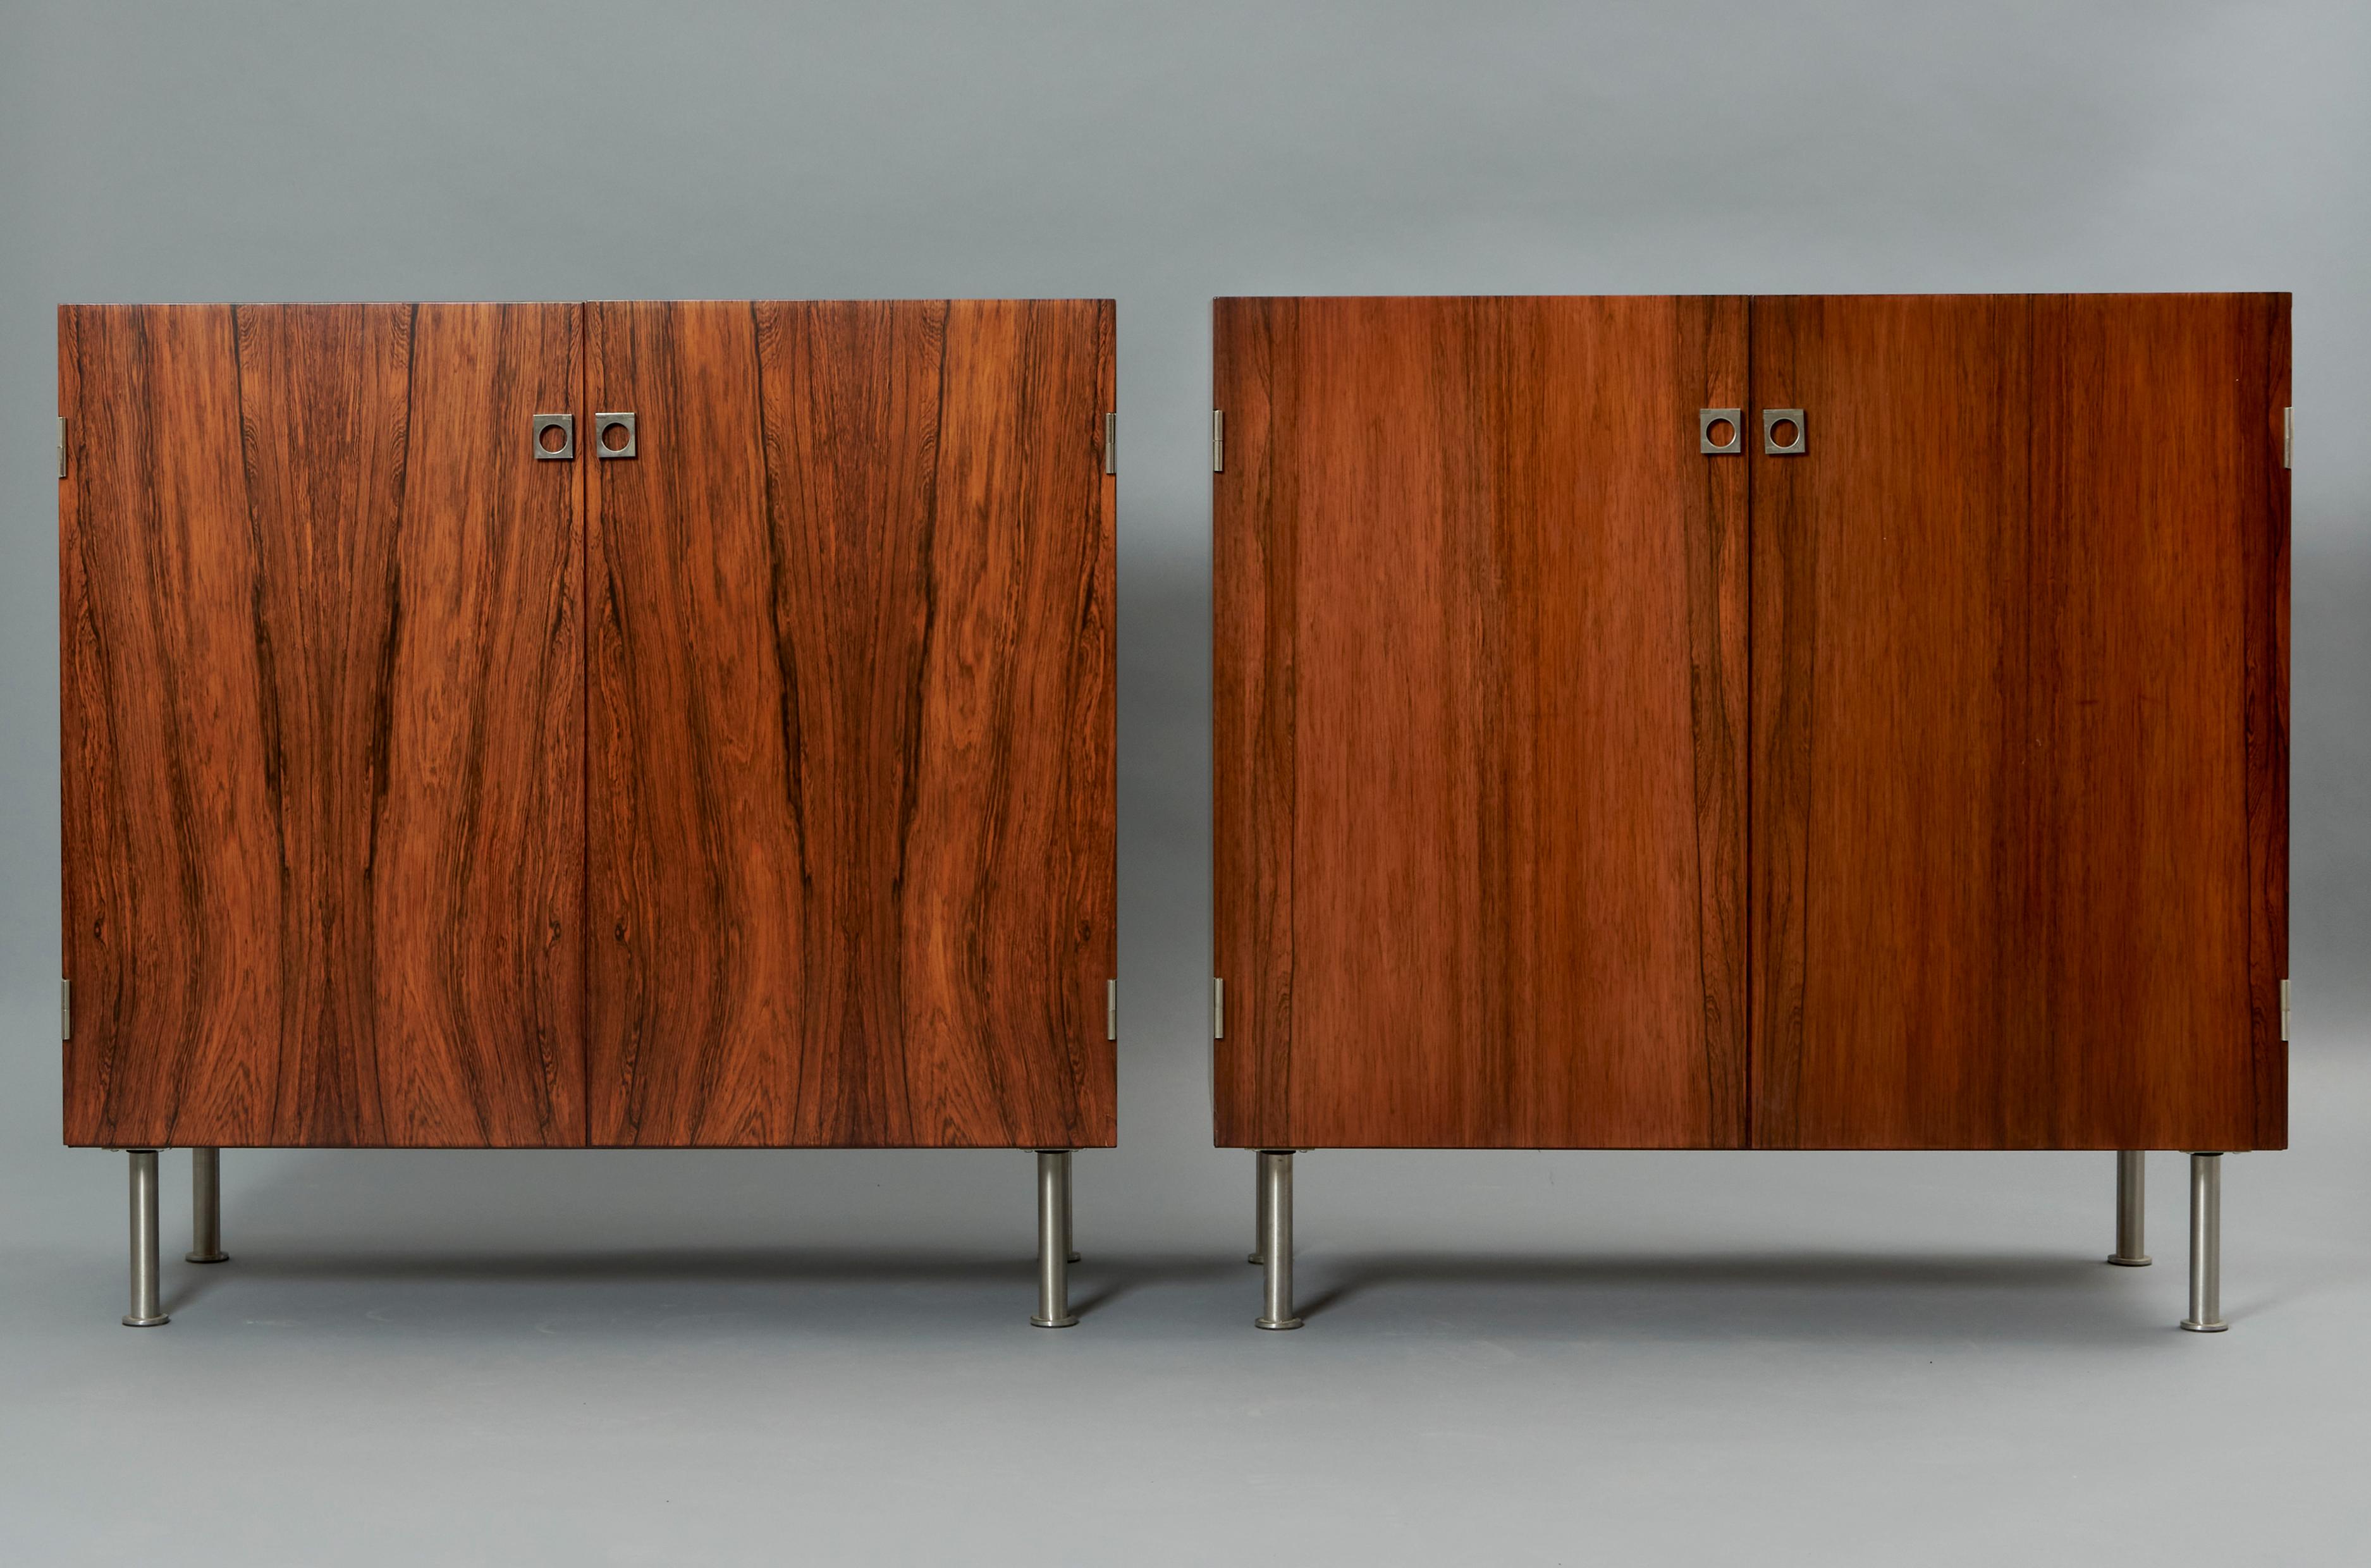 Pair of sideboards in rosewood with steel details produced by Sibast. Denmark, 1960s
Unknown designer, probably Arne Vodder who designed multiple models for the company using his characteristic materials and detailing such as those steel handles.